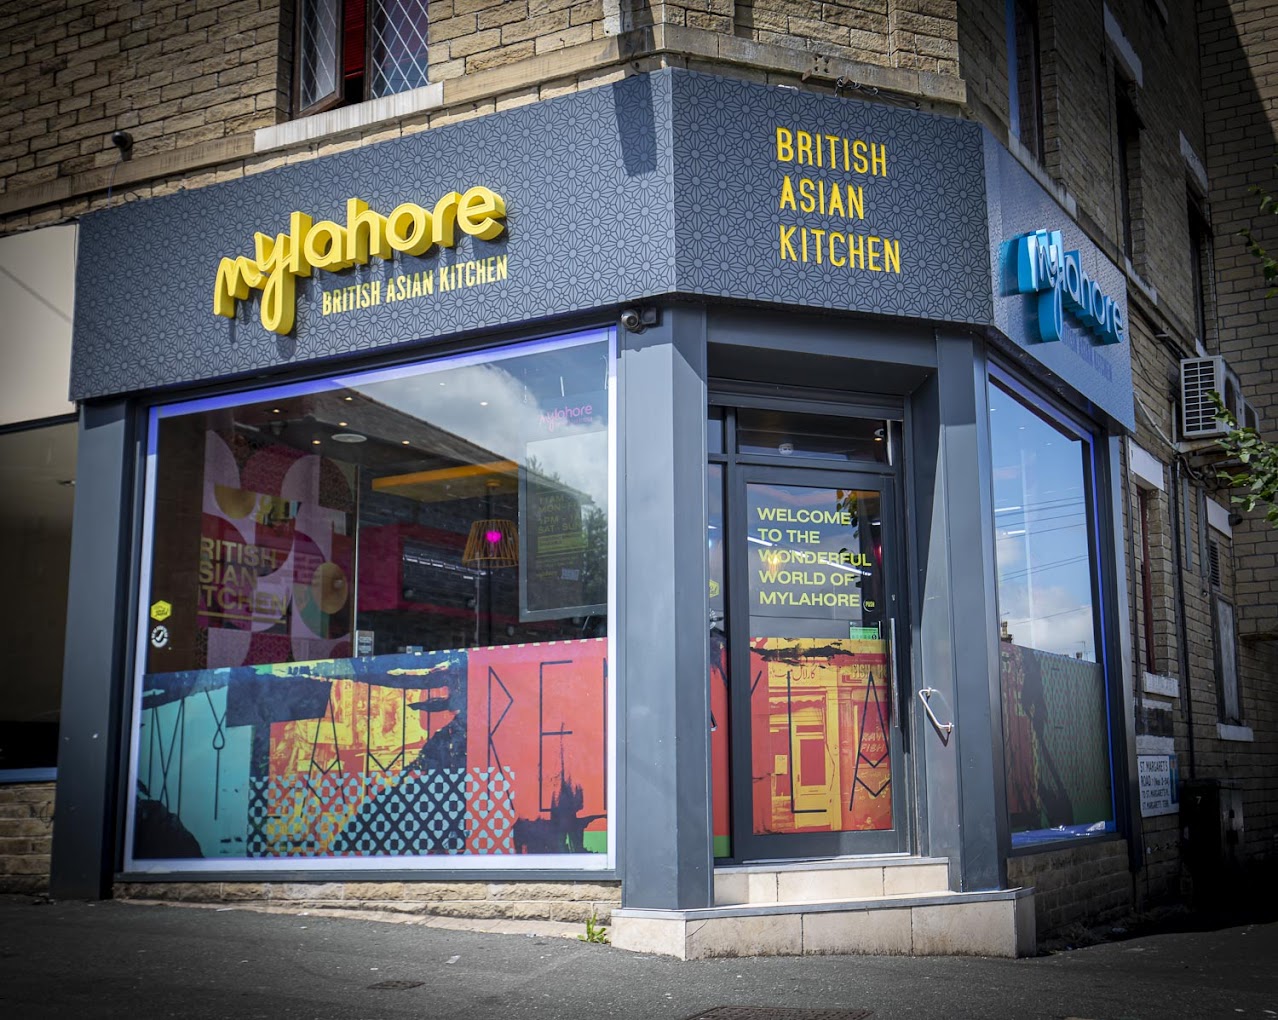 MyLahore building with sign that says British Asian Kitchen on the front door.